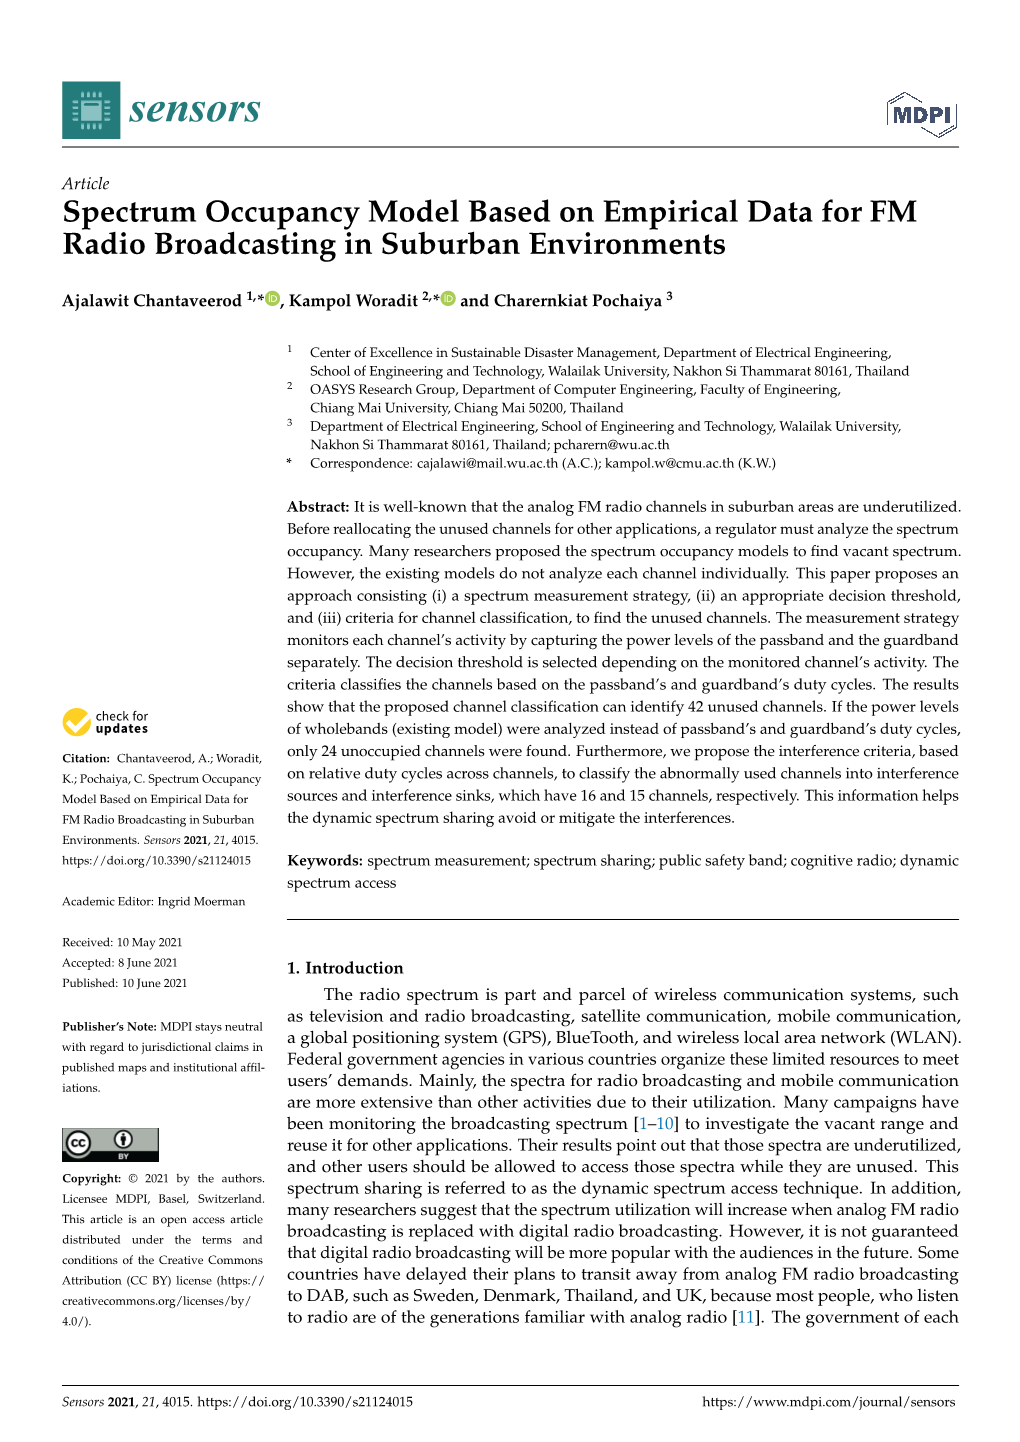 Spectrum Occupancy Model Based on Empirical Data for FM Radio Broadcasting in Suburban Environments